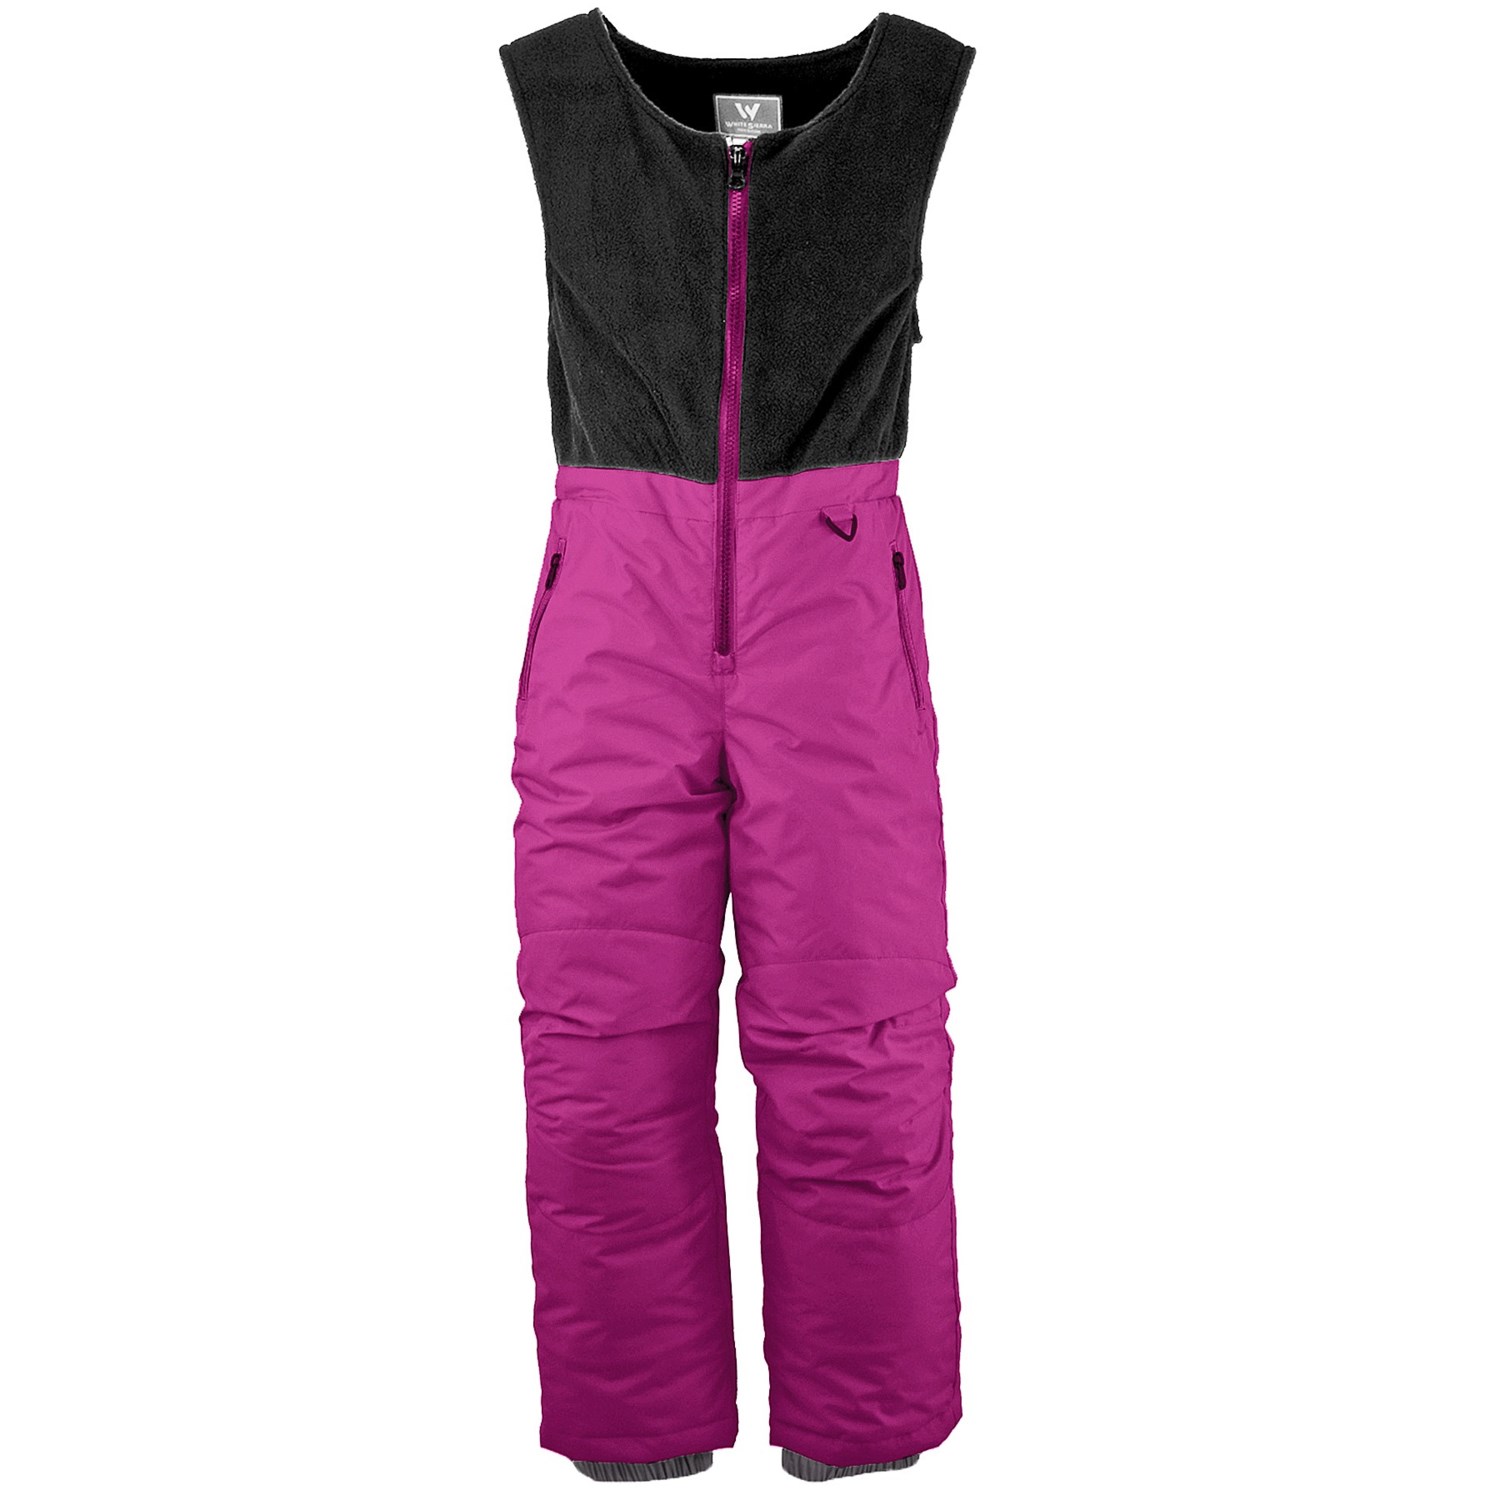 White Sierra Snow Bib Overalls (For Toddlers) - Save 66%